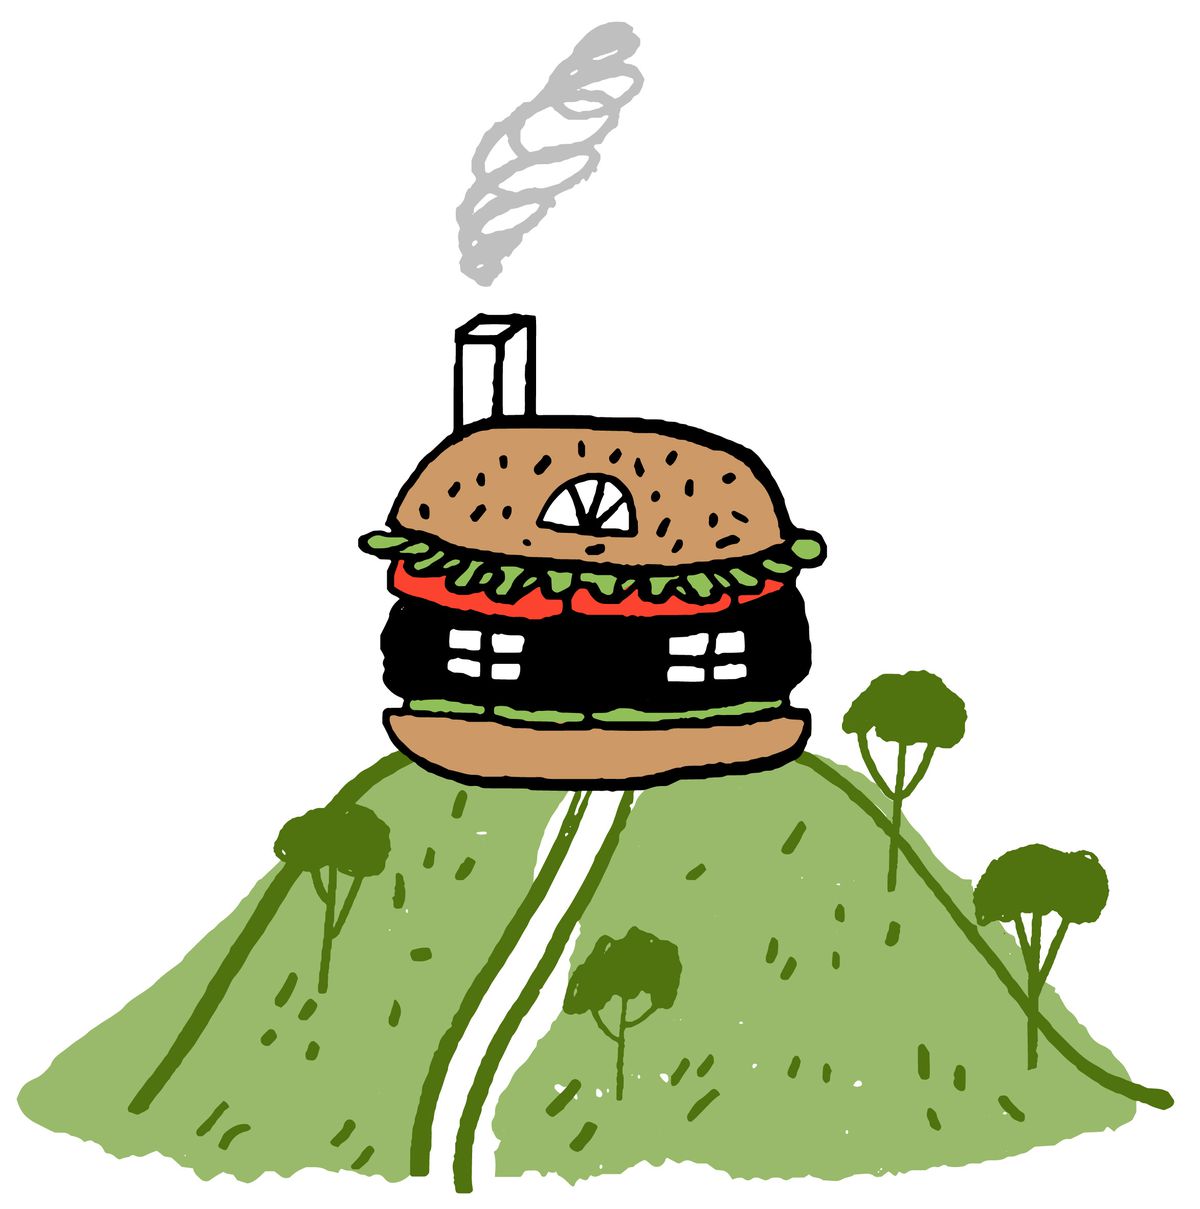 An illustration of a burger in the shape of a home on top of a hill. 